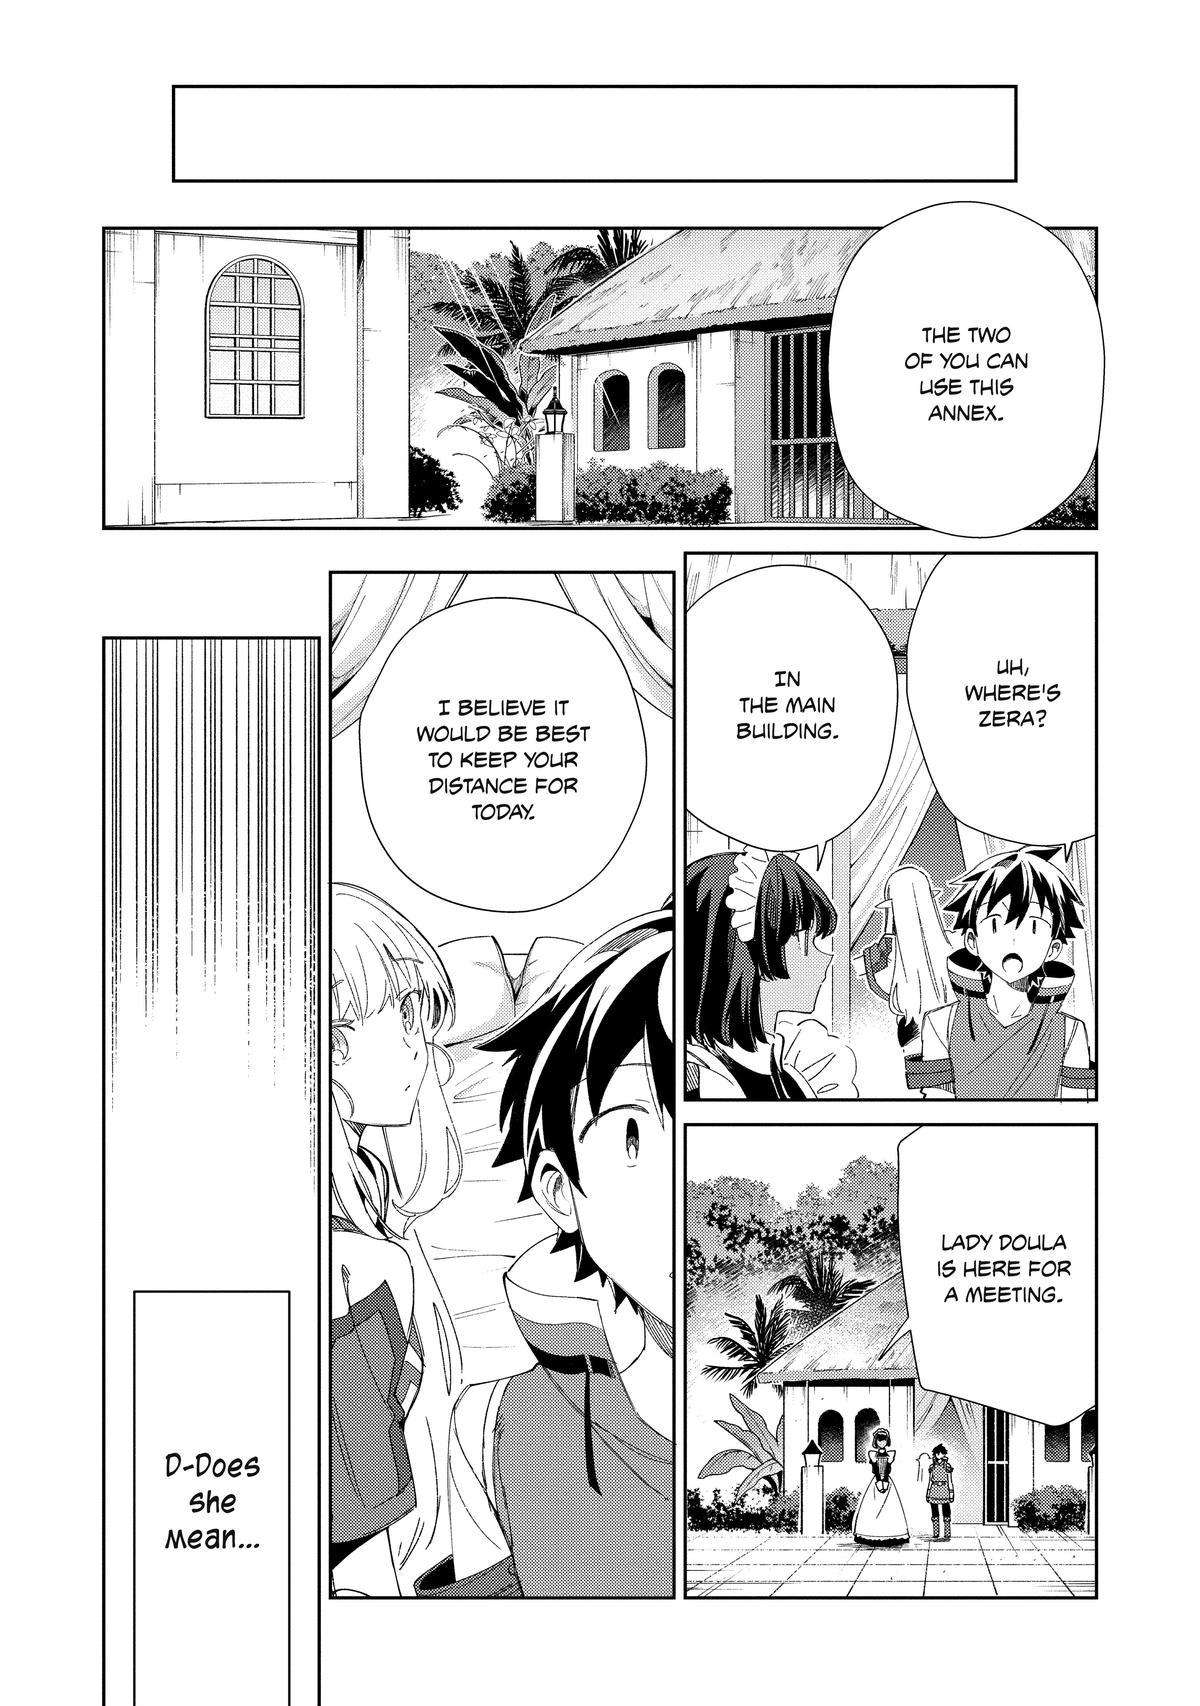 Welcome to Japan, Elf-san! Chapter 41